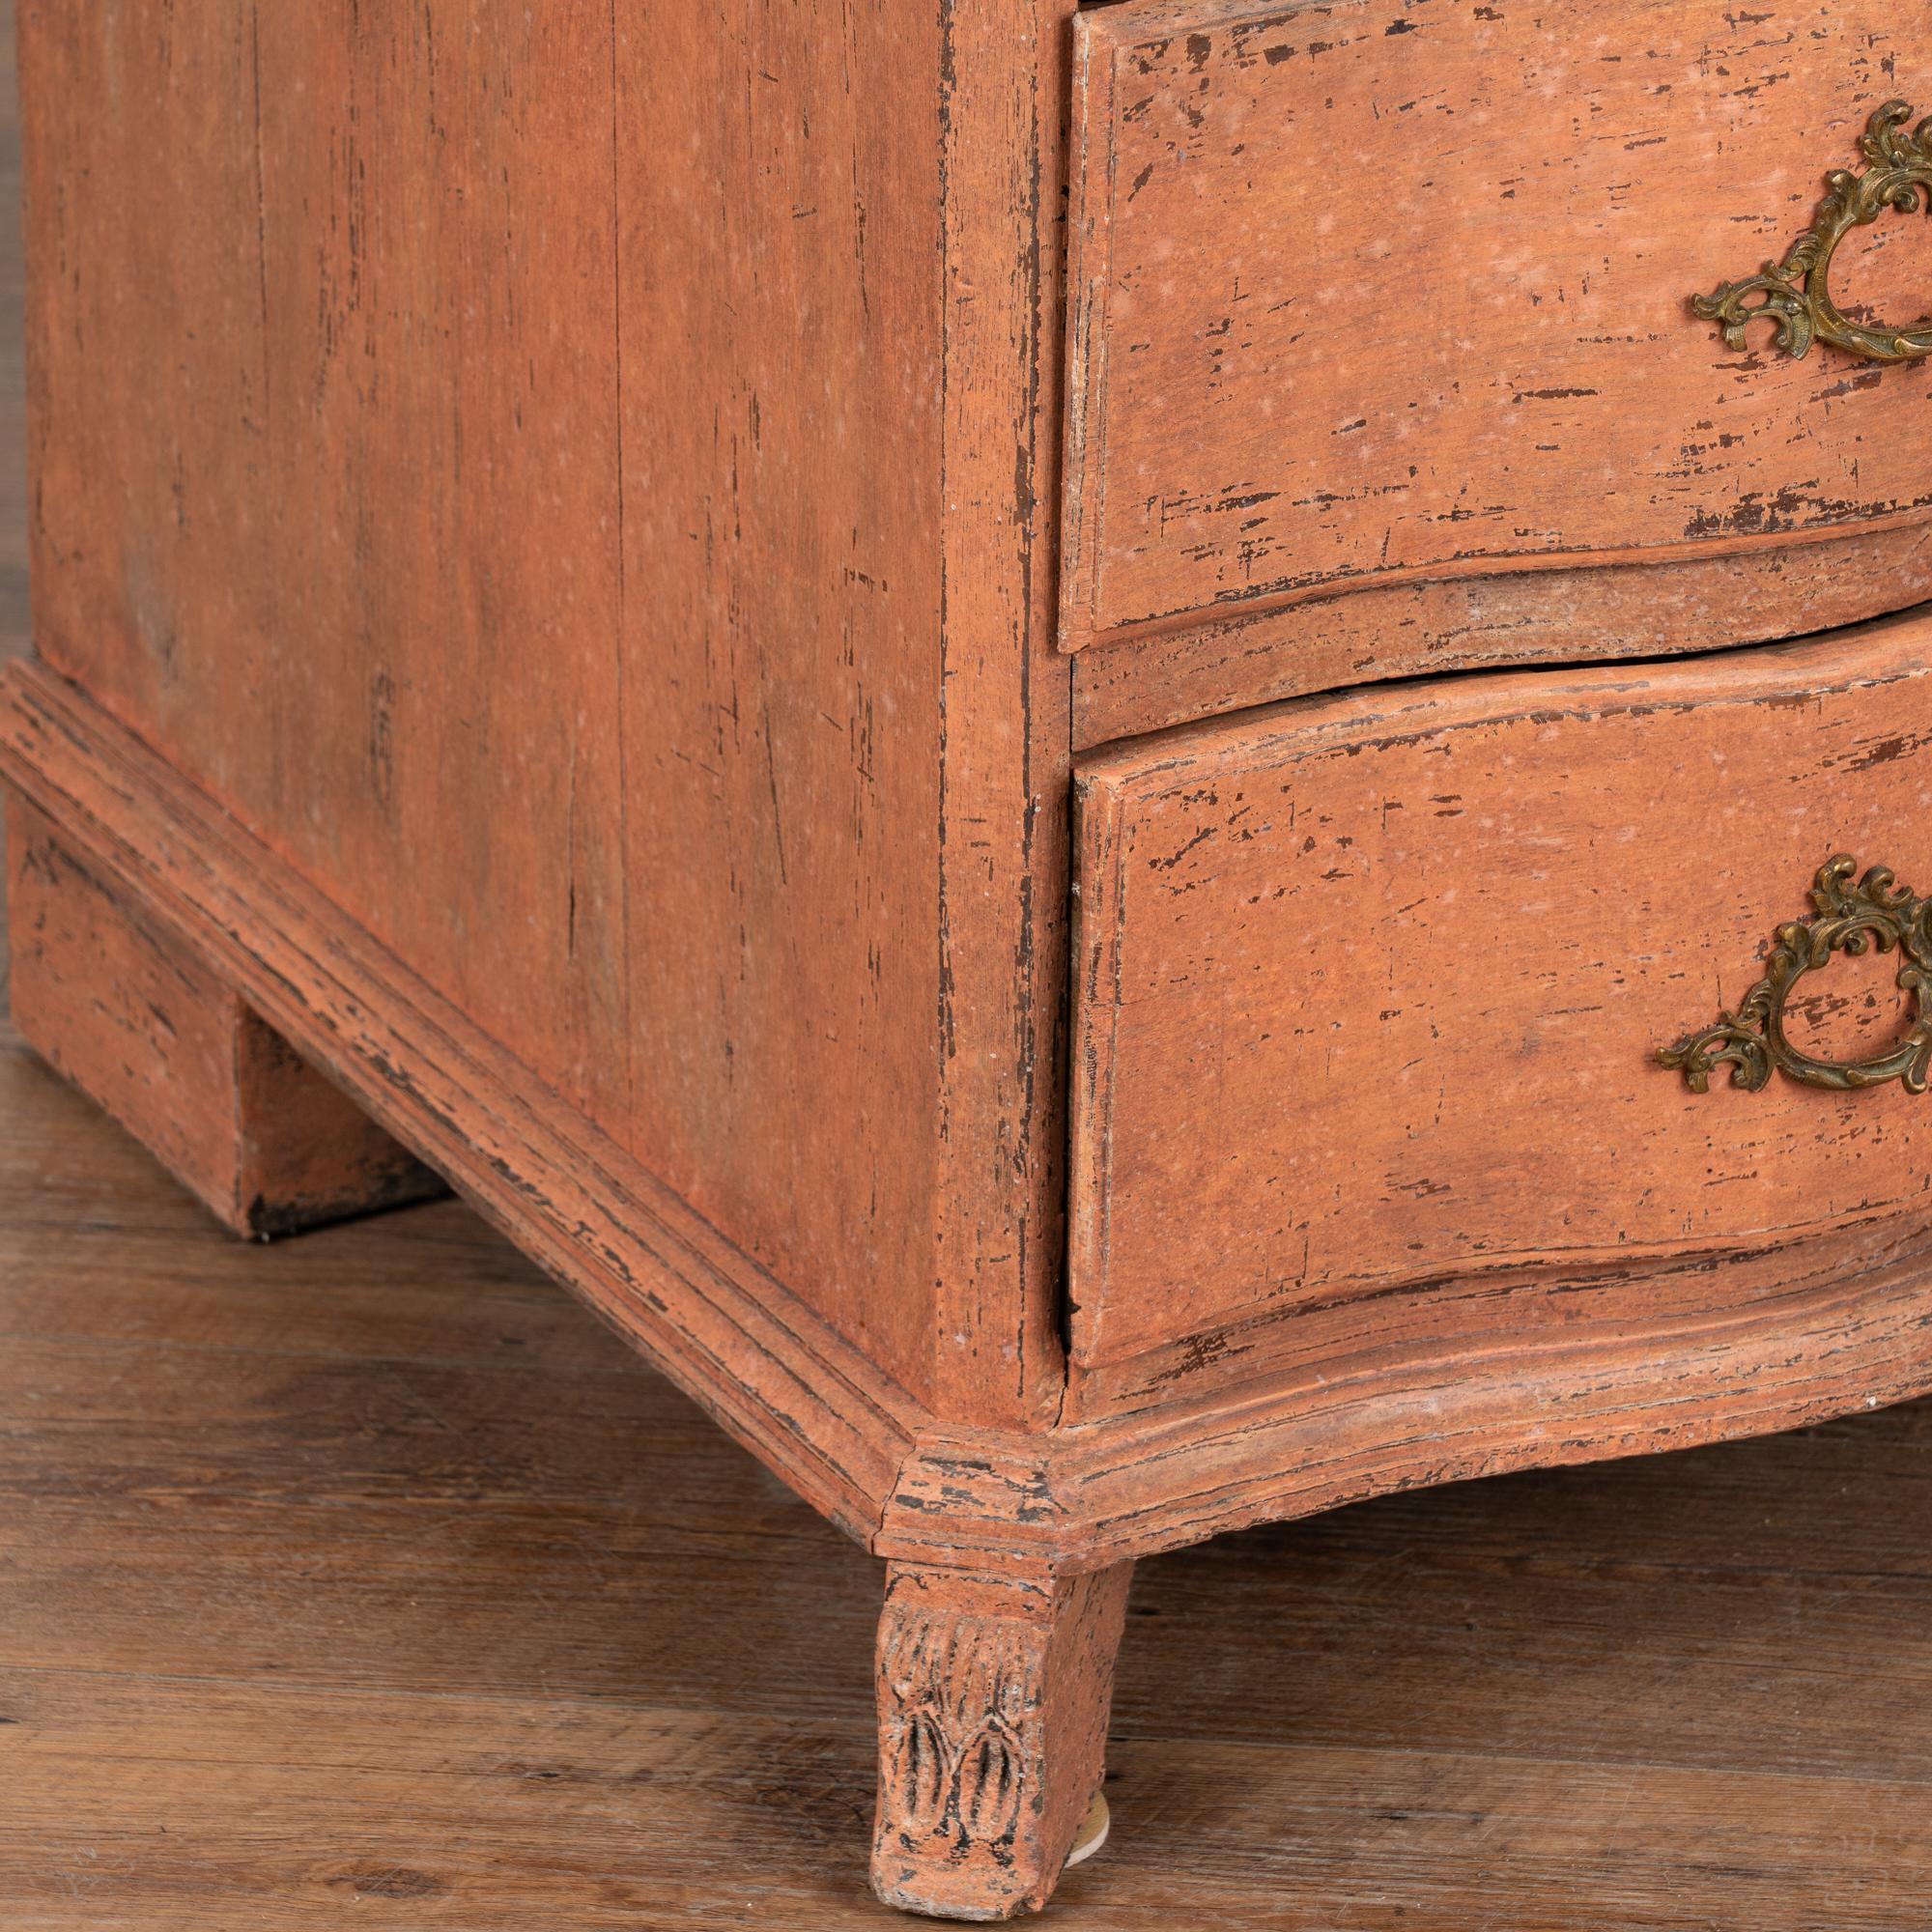 Oak Secretary Bureau With Painted Finish from Sweden circa 1760-1800 For Sale 5